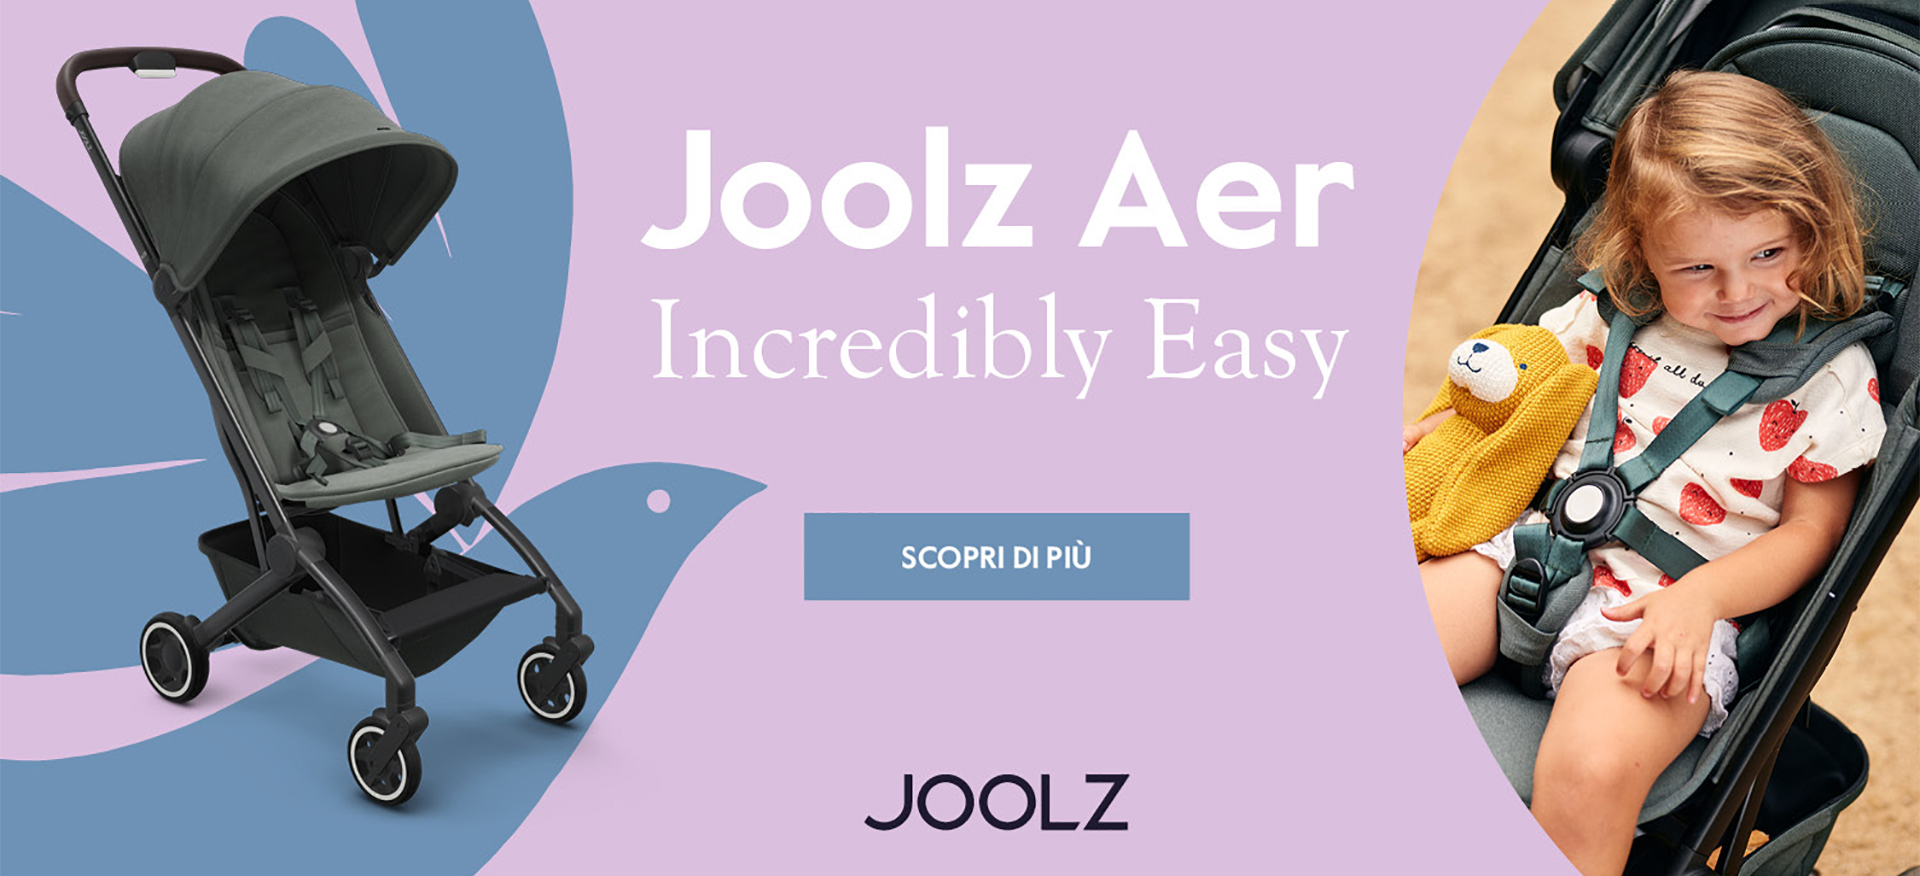 Joolz_-_Online_-_Retail_Banners_-_Aer_-_Sept_Push_-_IT_-_1920x876